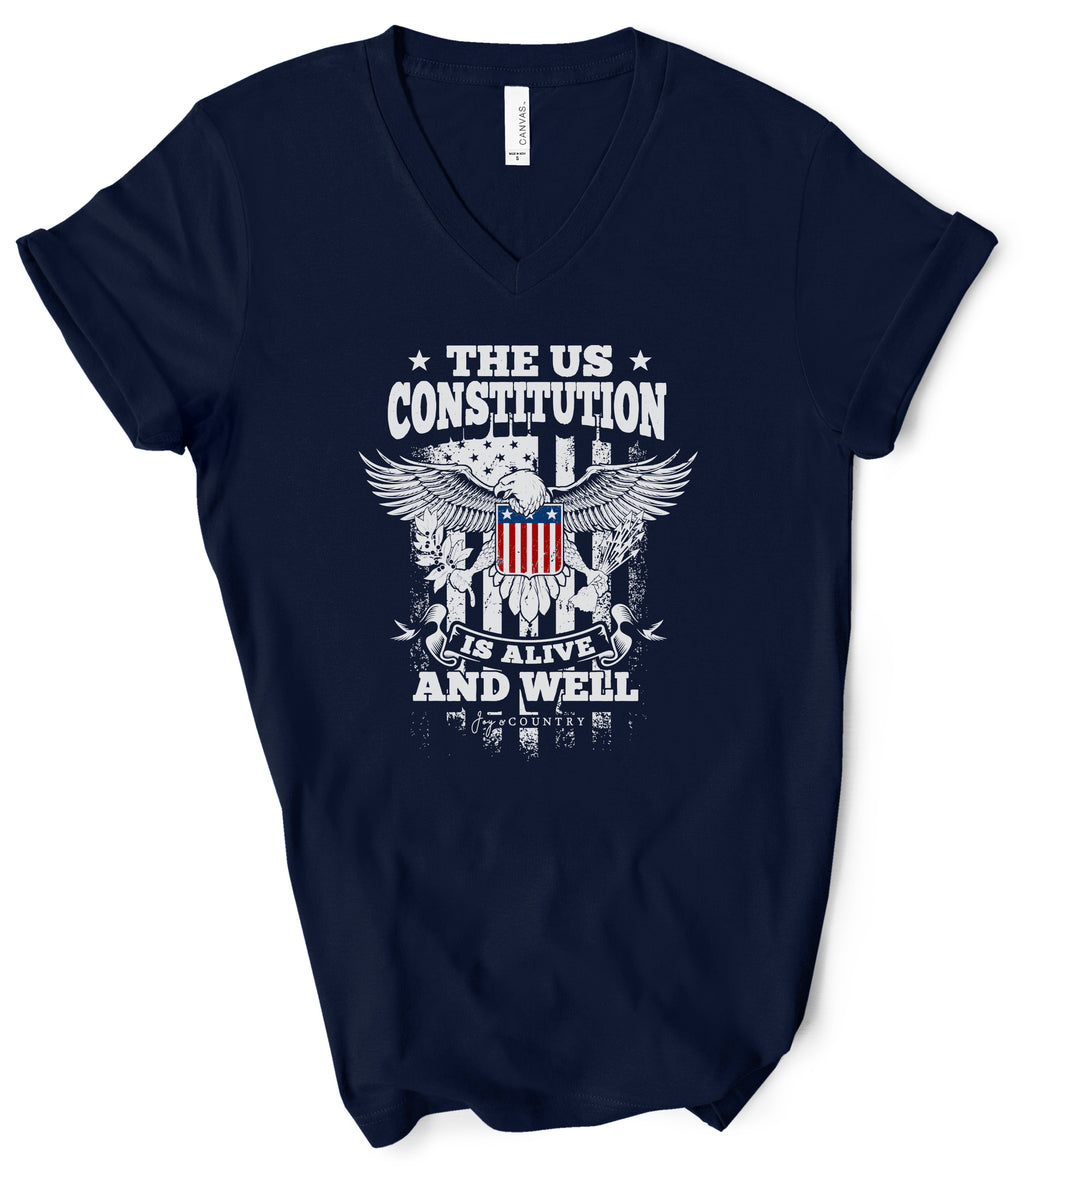 The US Constitution is Alive and Well - Unisex V-Neck Tee - Joy & Country